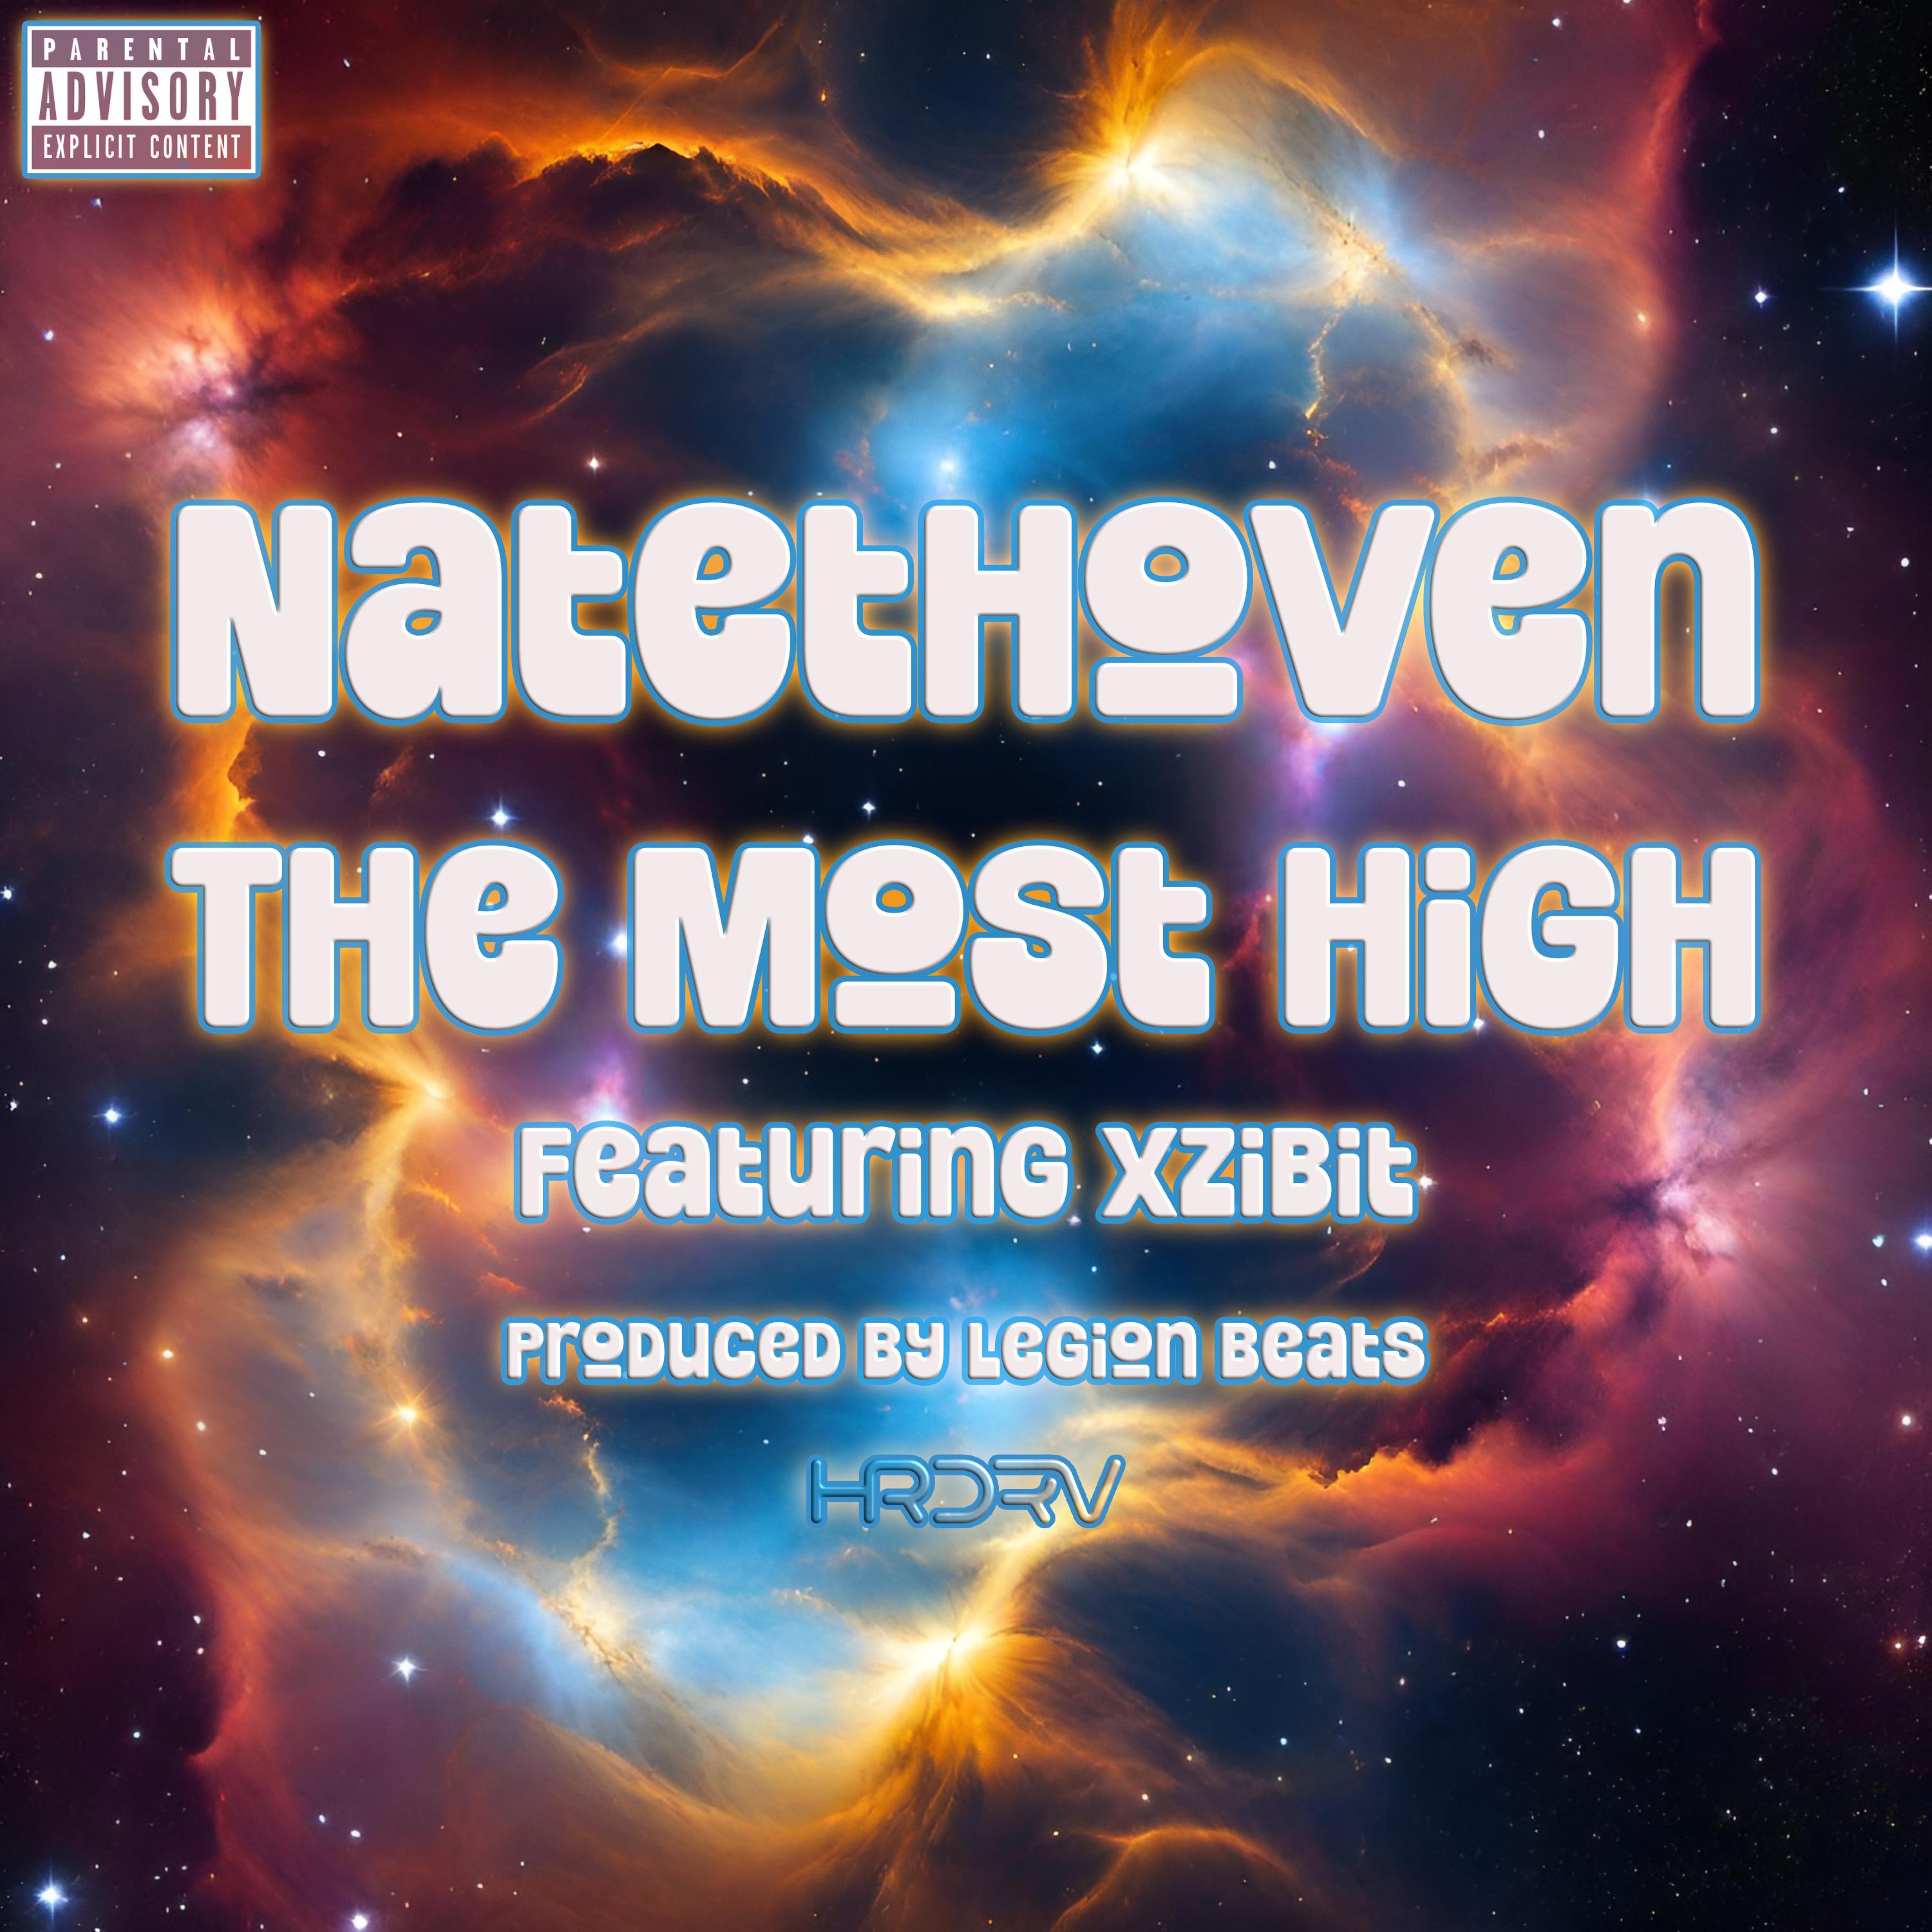 Natethoven - The Most High